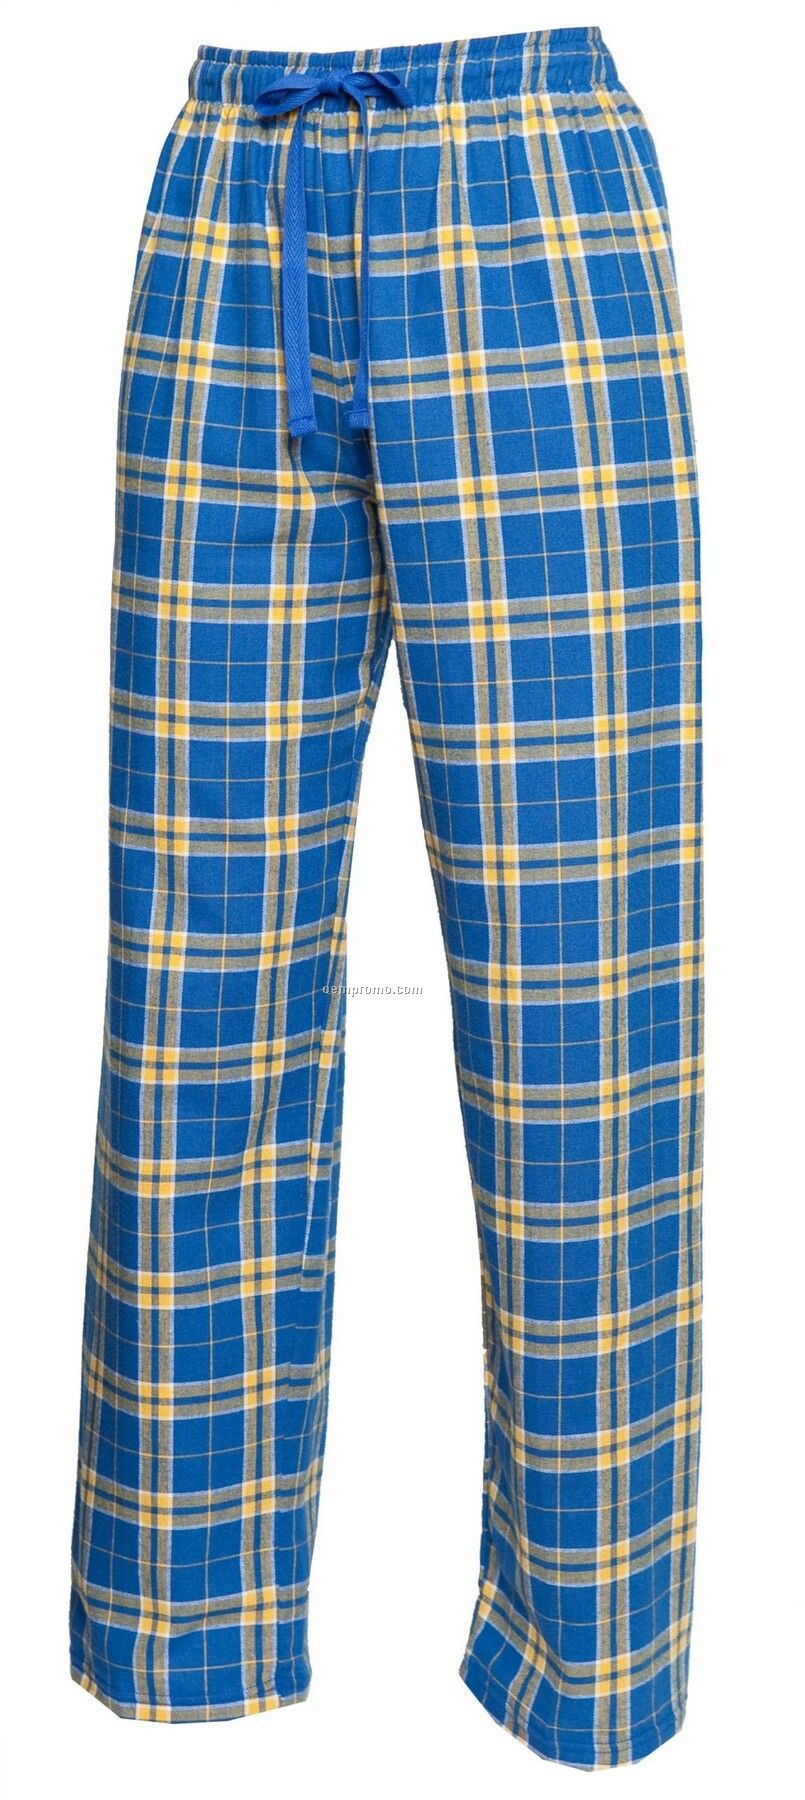 Youth Team Pride Flannel Pant In Royal Blue & Gold Plaid